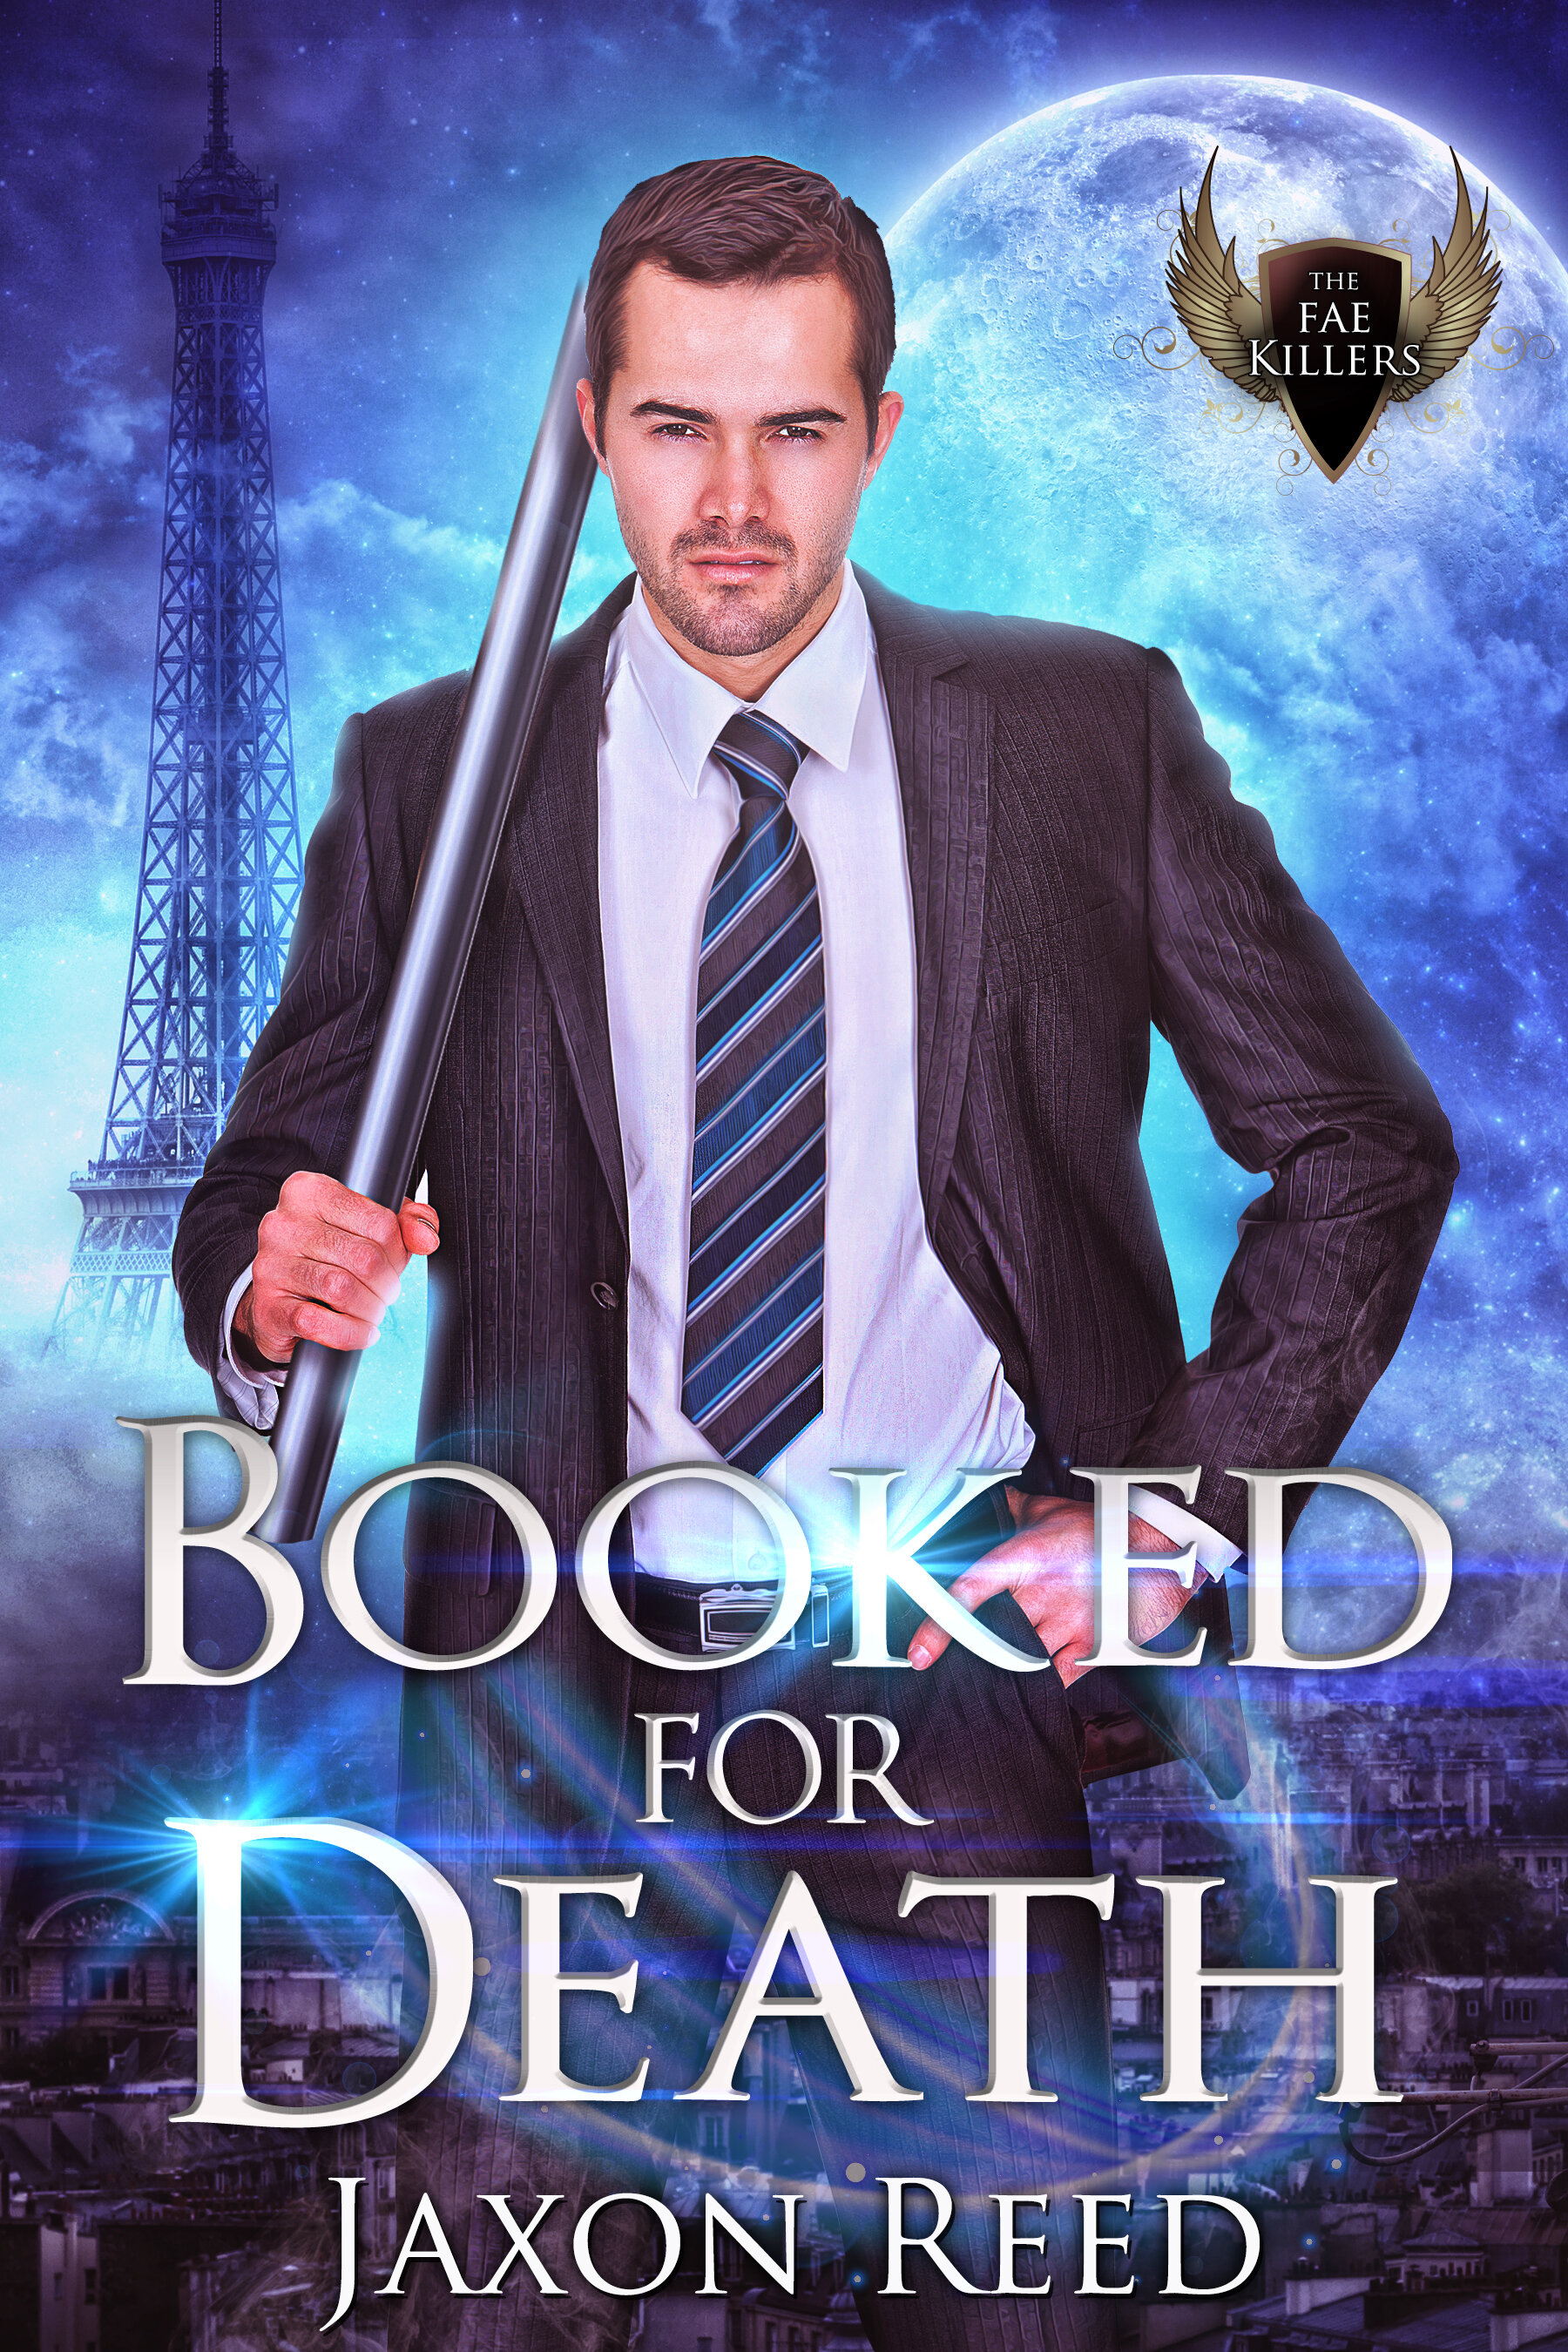 Booked for Death - The Fae Killers - Jaxon Reed v2.jpg